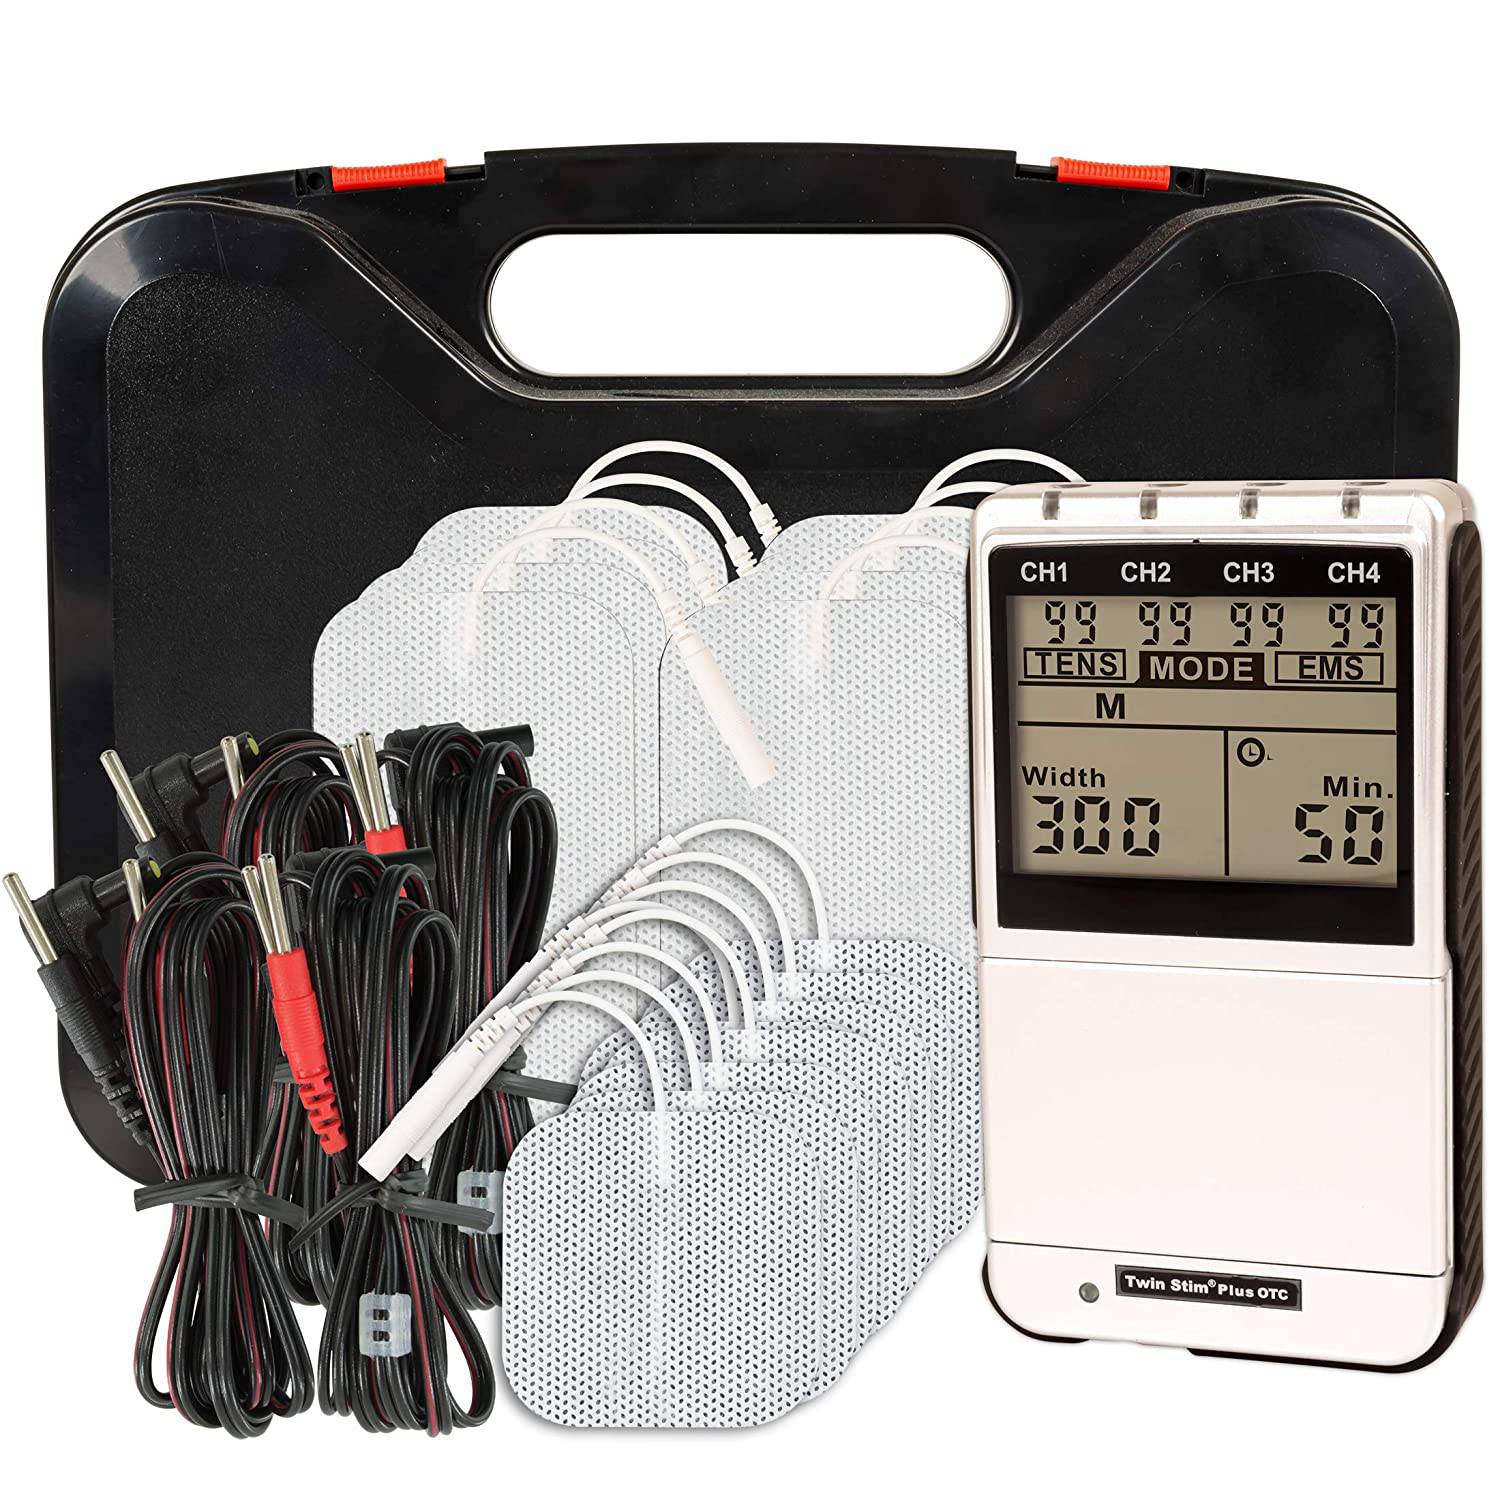 TENS 7000 Lead Wires - TENS Unit Lead Wires For Electrodes - 5 Pair 10  Total Lead Wires - Universal and Compatible With Most TENS Units EMS and  Other Electrotherapy Stimulation Devices